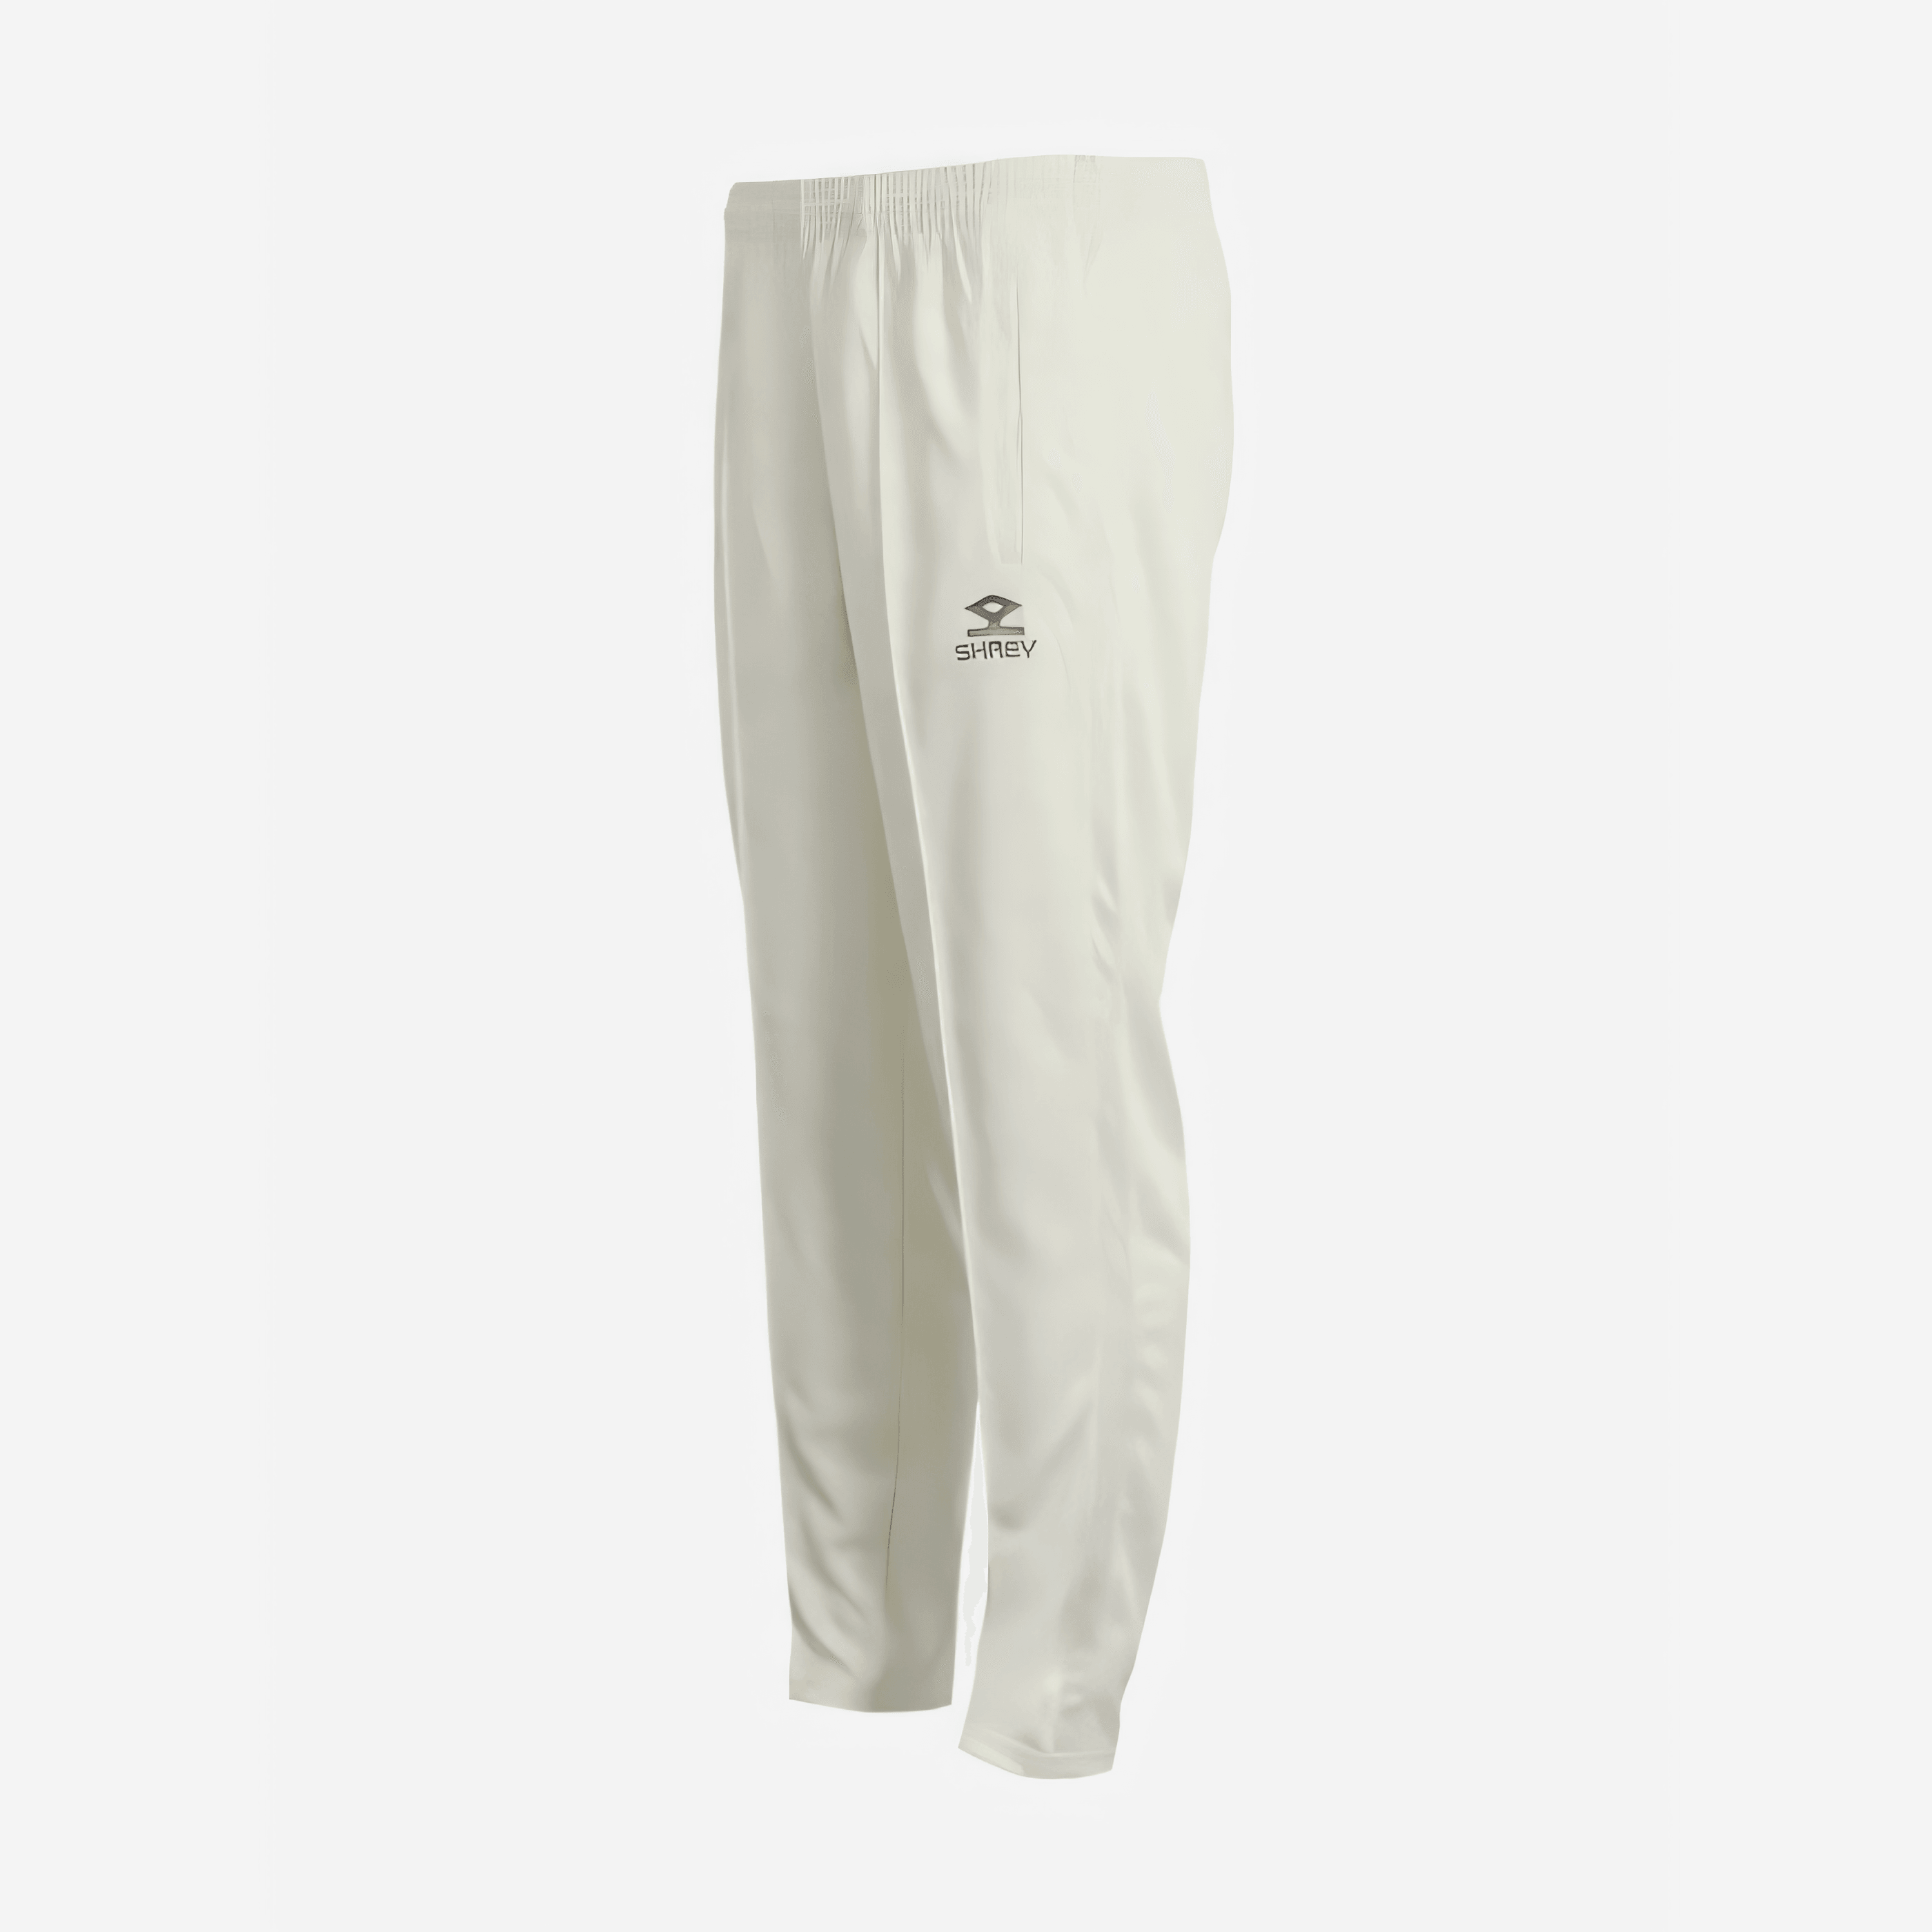 Shrey Match Cricket Trousers White - AT Sports